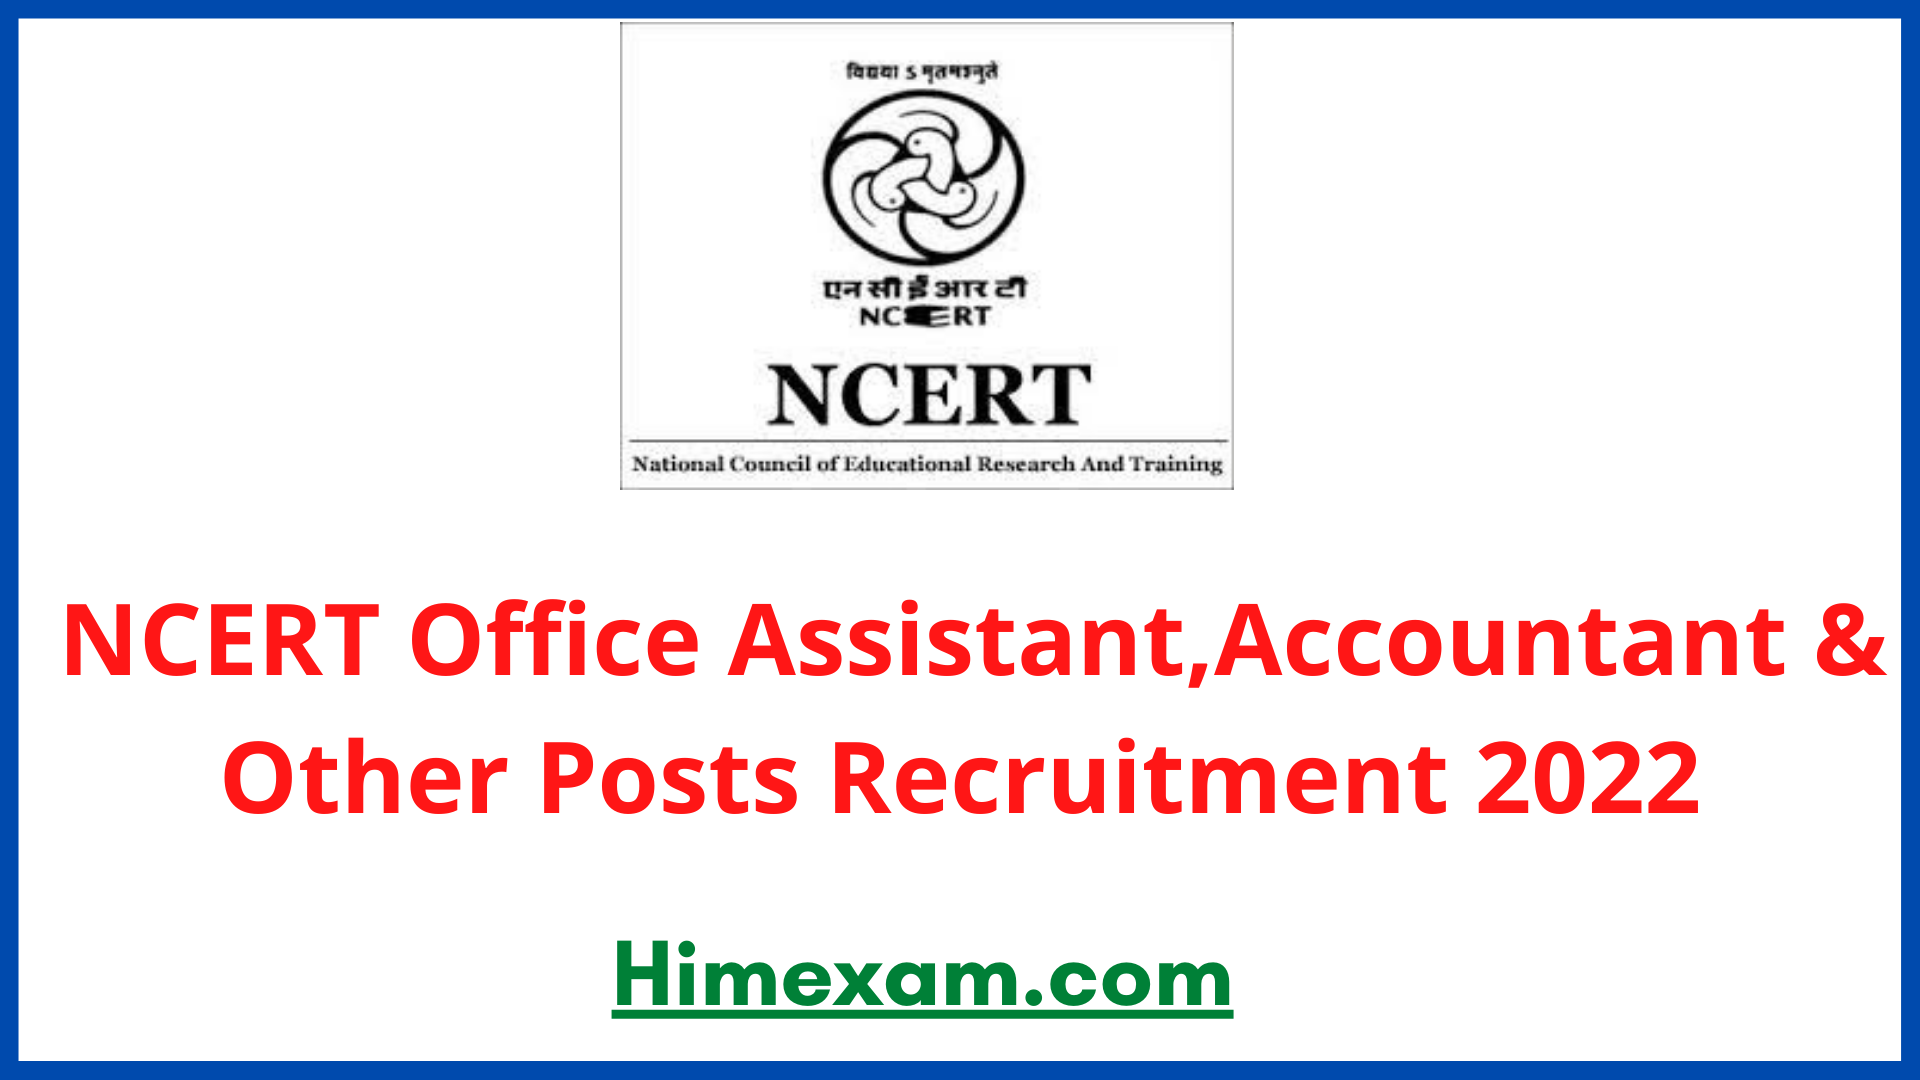 NCERT Office Assistant,Accountant & Other Posts Recruitment 2022